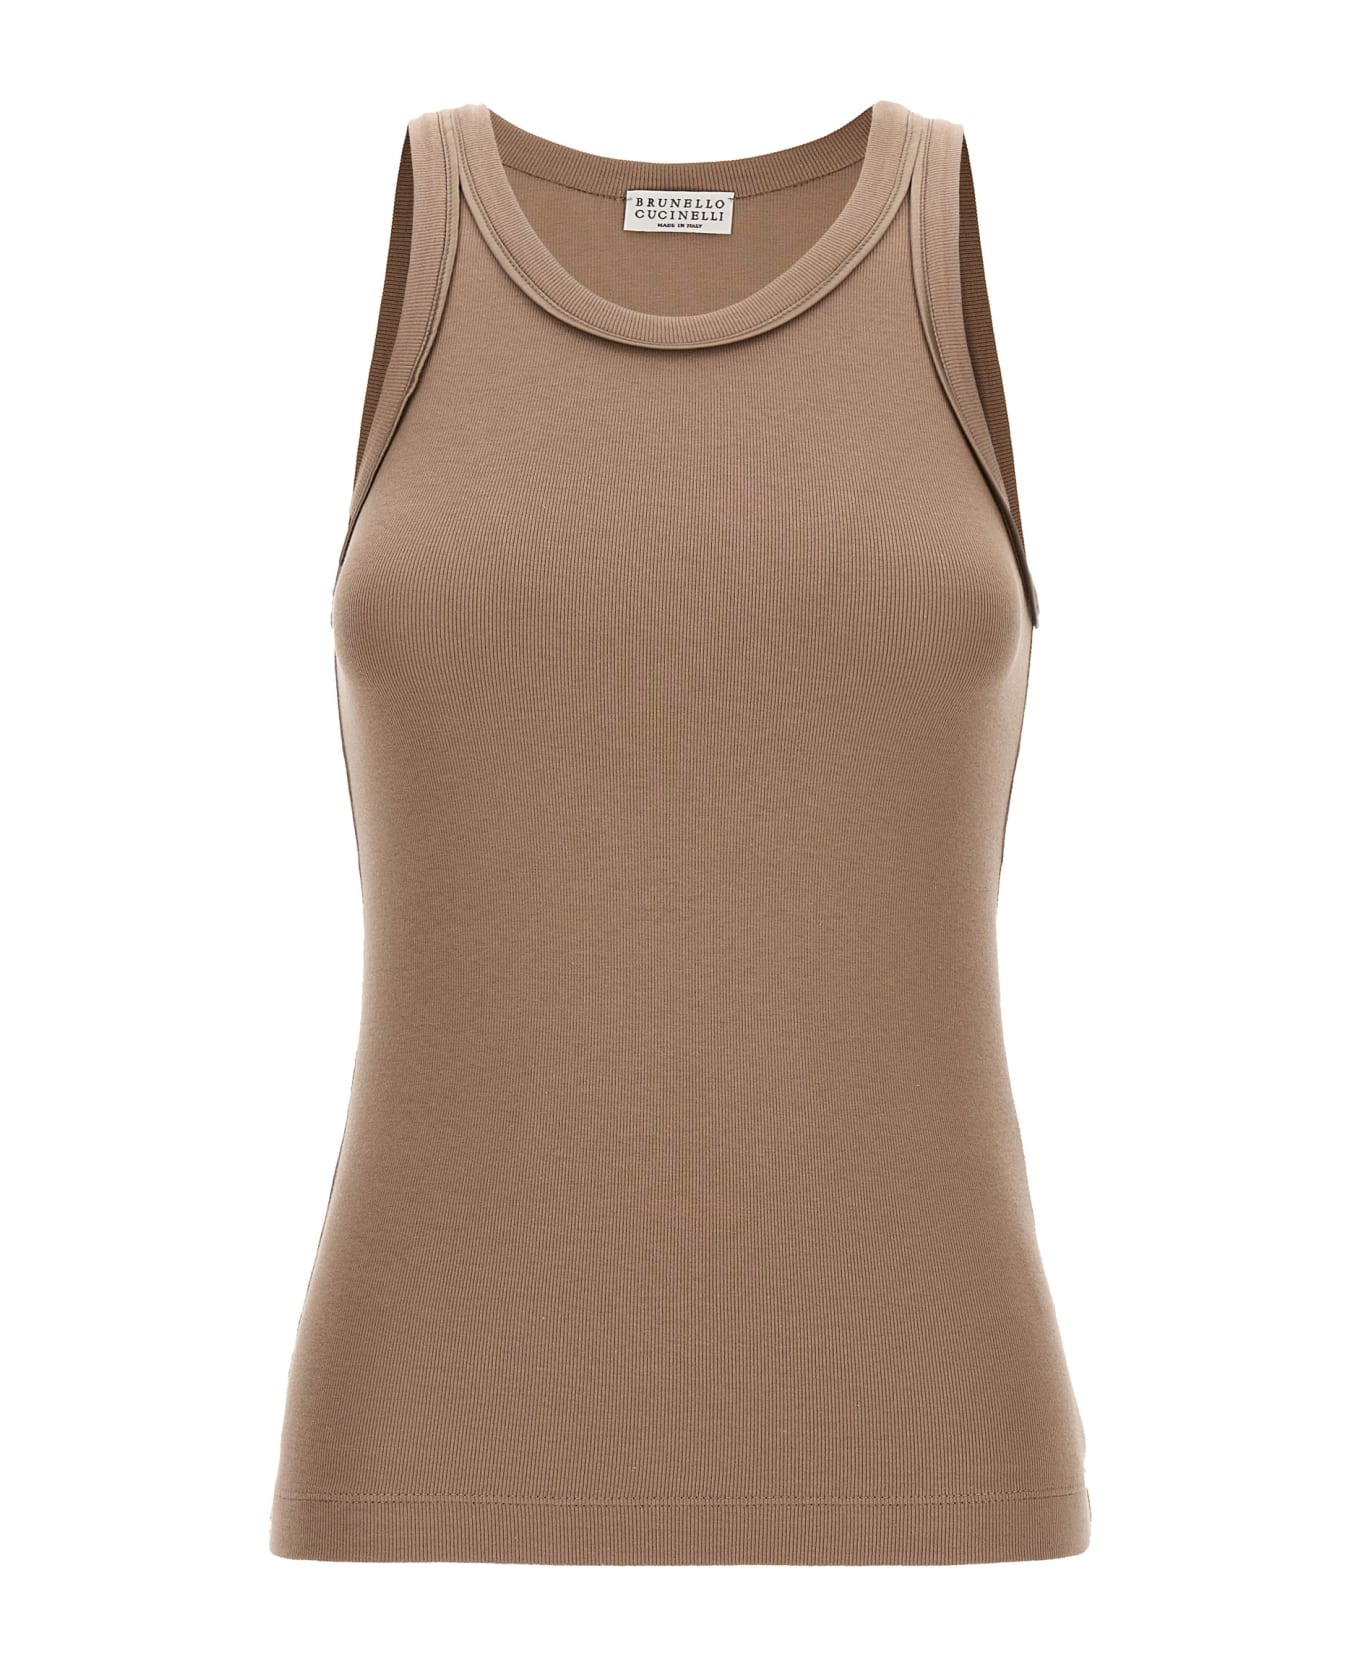 Brunello Cucinelli Ribbed Top - Brown